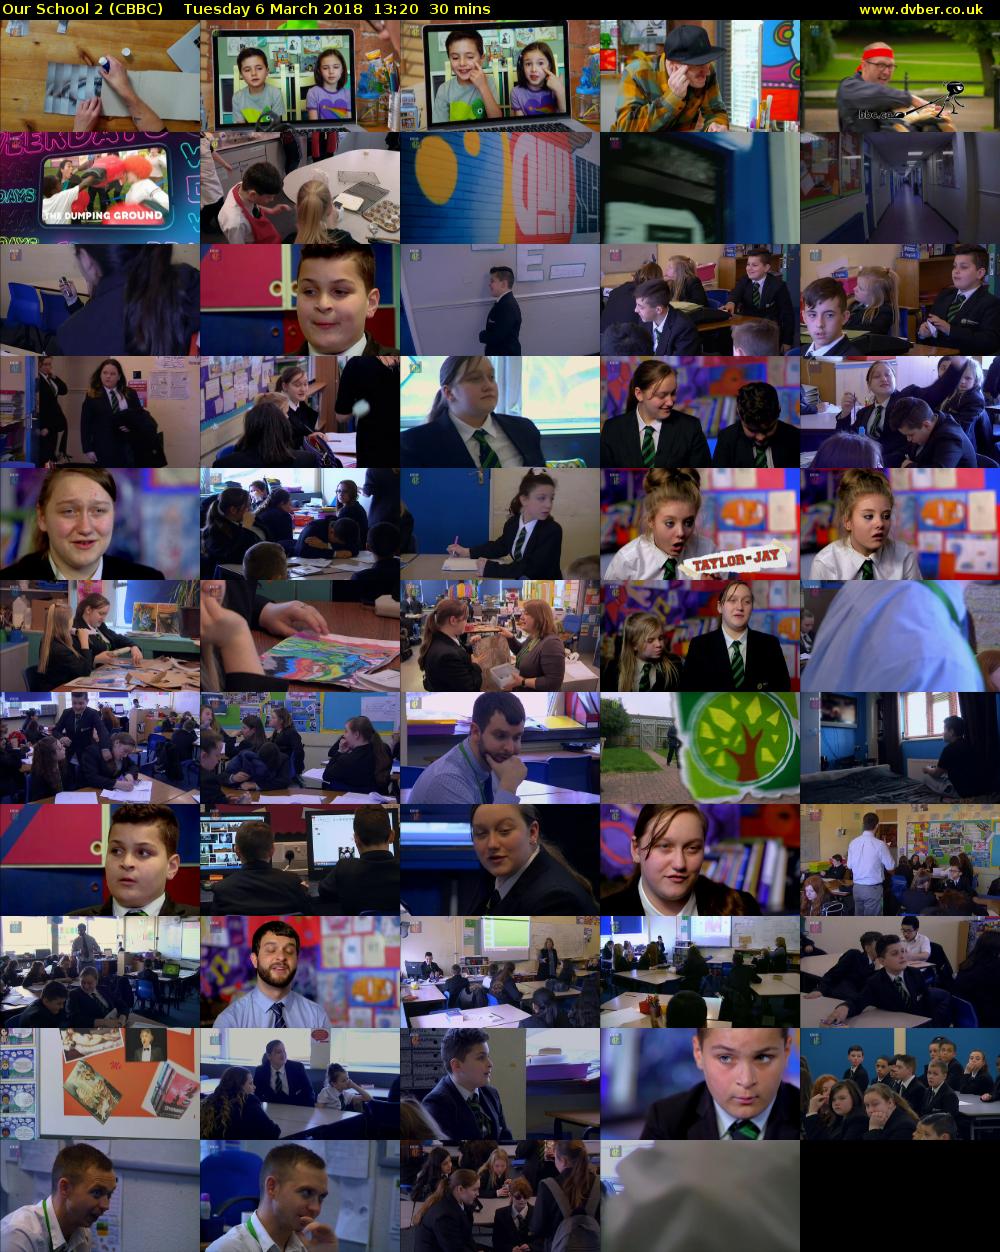 Our School 2 (CBBC) Tuesday 6 March 2018 13:20 - 13:50